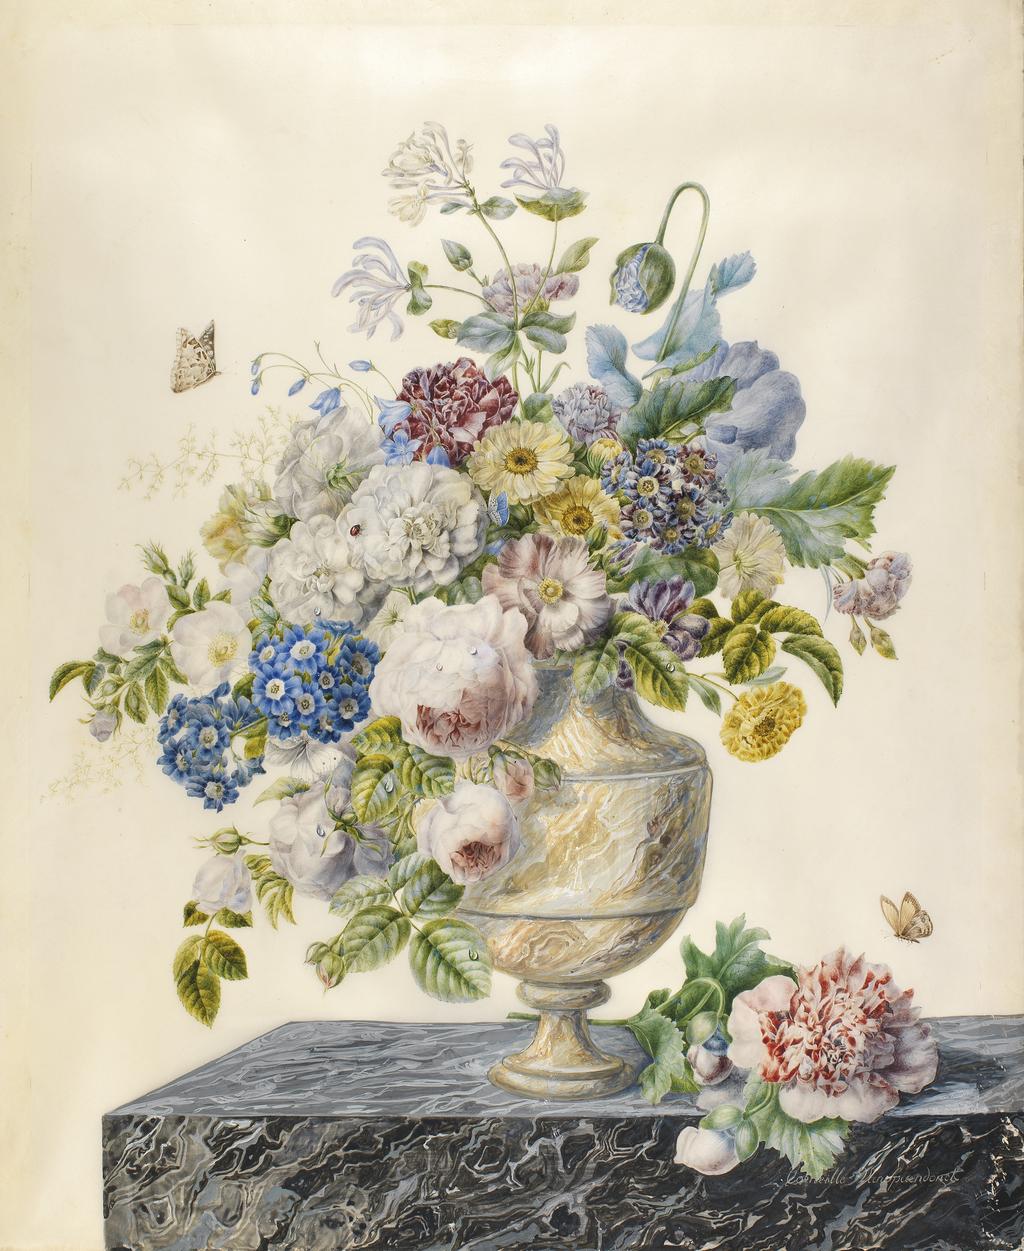 An image of On black and white marble slab a veined vase containing honeysuckle, opium poppy, iris, auricula, campanula, carnation, marigold, wild rose, centifolia rose, cabbage rose, chrysanthemum, dahlia and Japanese anemone. Spaendonck, Cornelis van (Dutch, 1756-1840). Watercolour and bodycolour over graphite outline on vellum, stuck to board, height 747 mm, width 558 mm. Acquisition: bequeathed; 1975; Fairhaven, Henry Rogers Broughton